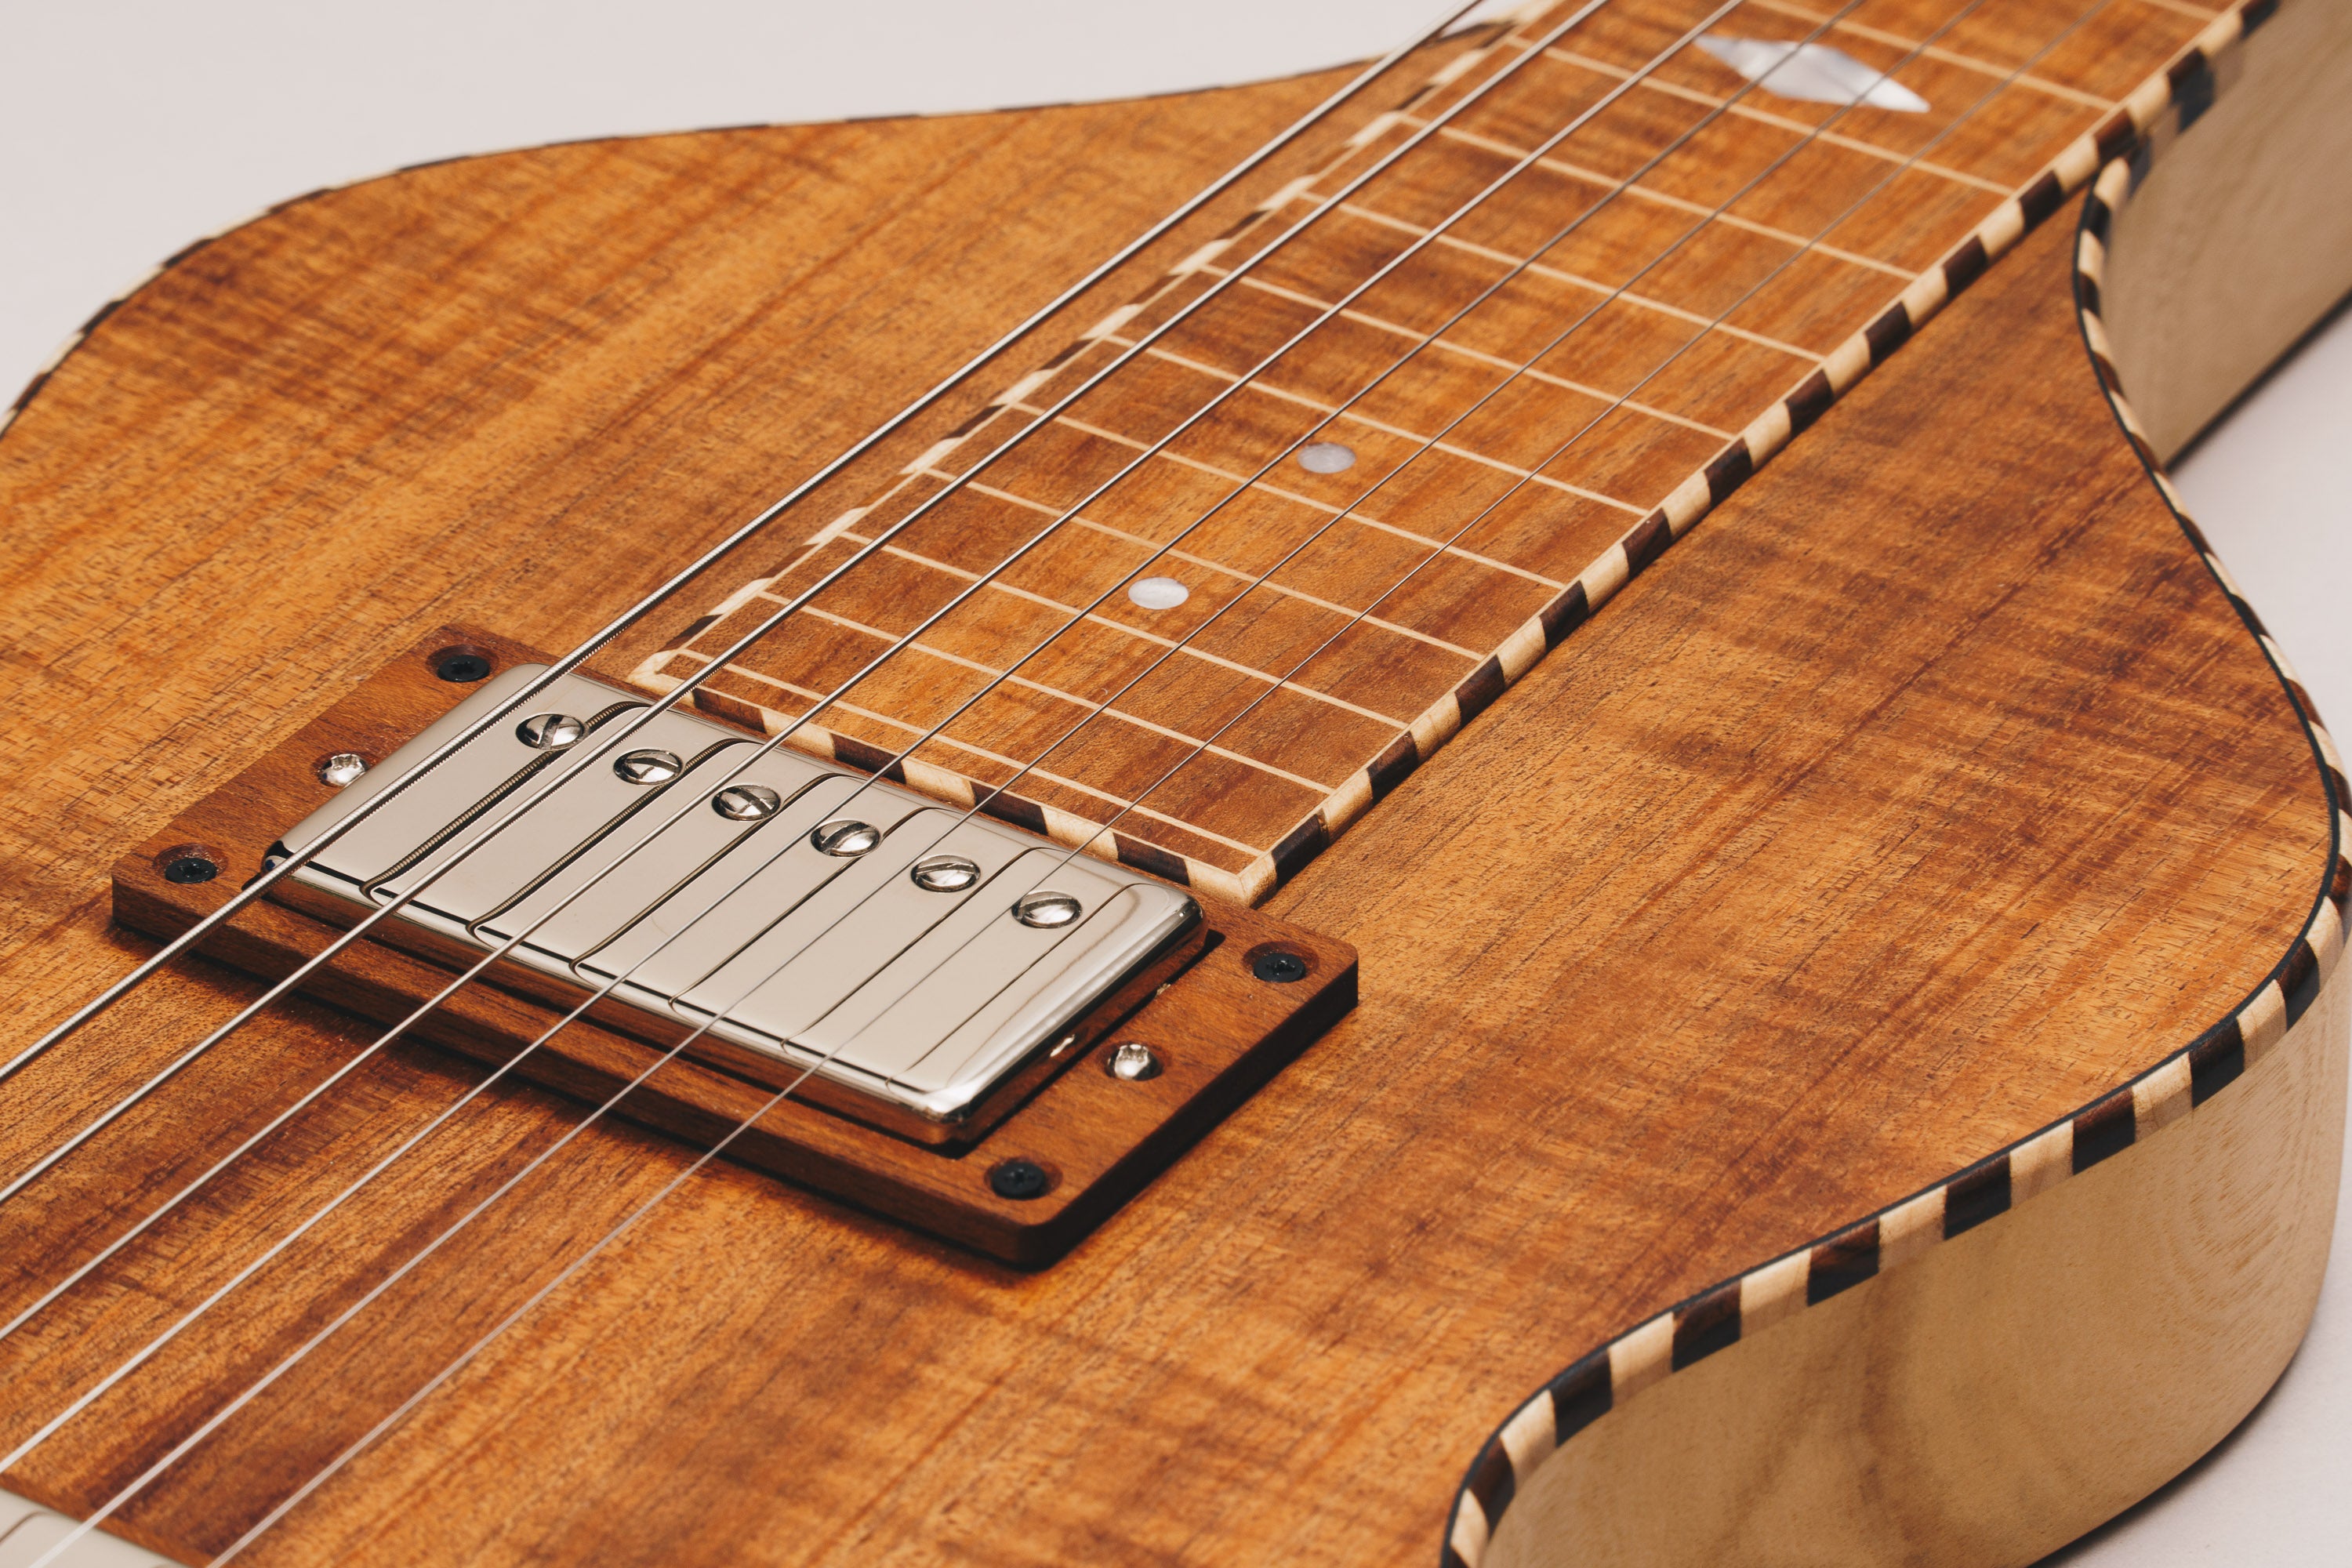 Electric Lap Steel Weissenborn Acoustic Lap Steel Slide Guitar by master luthier Richard Wilson. Handcrafted in Australia. Serial no. RW2037-286.